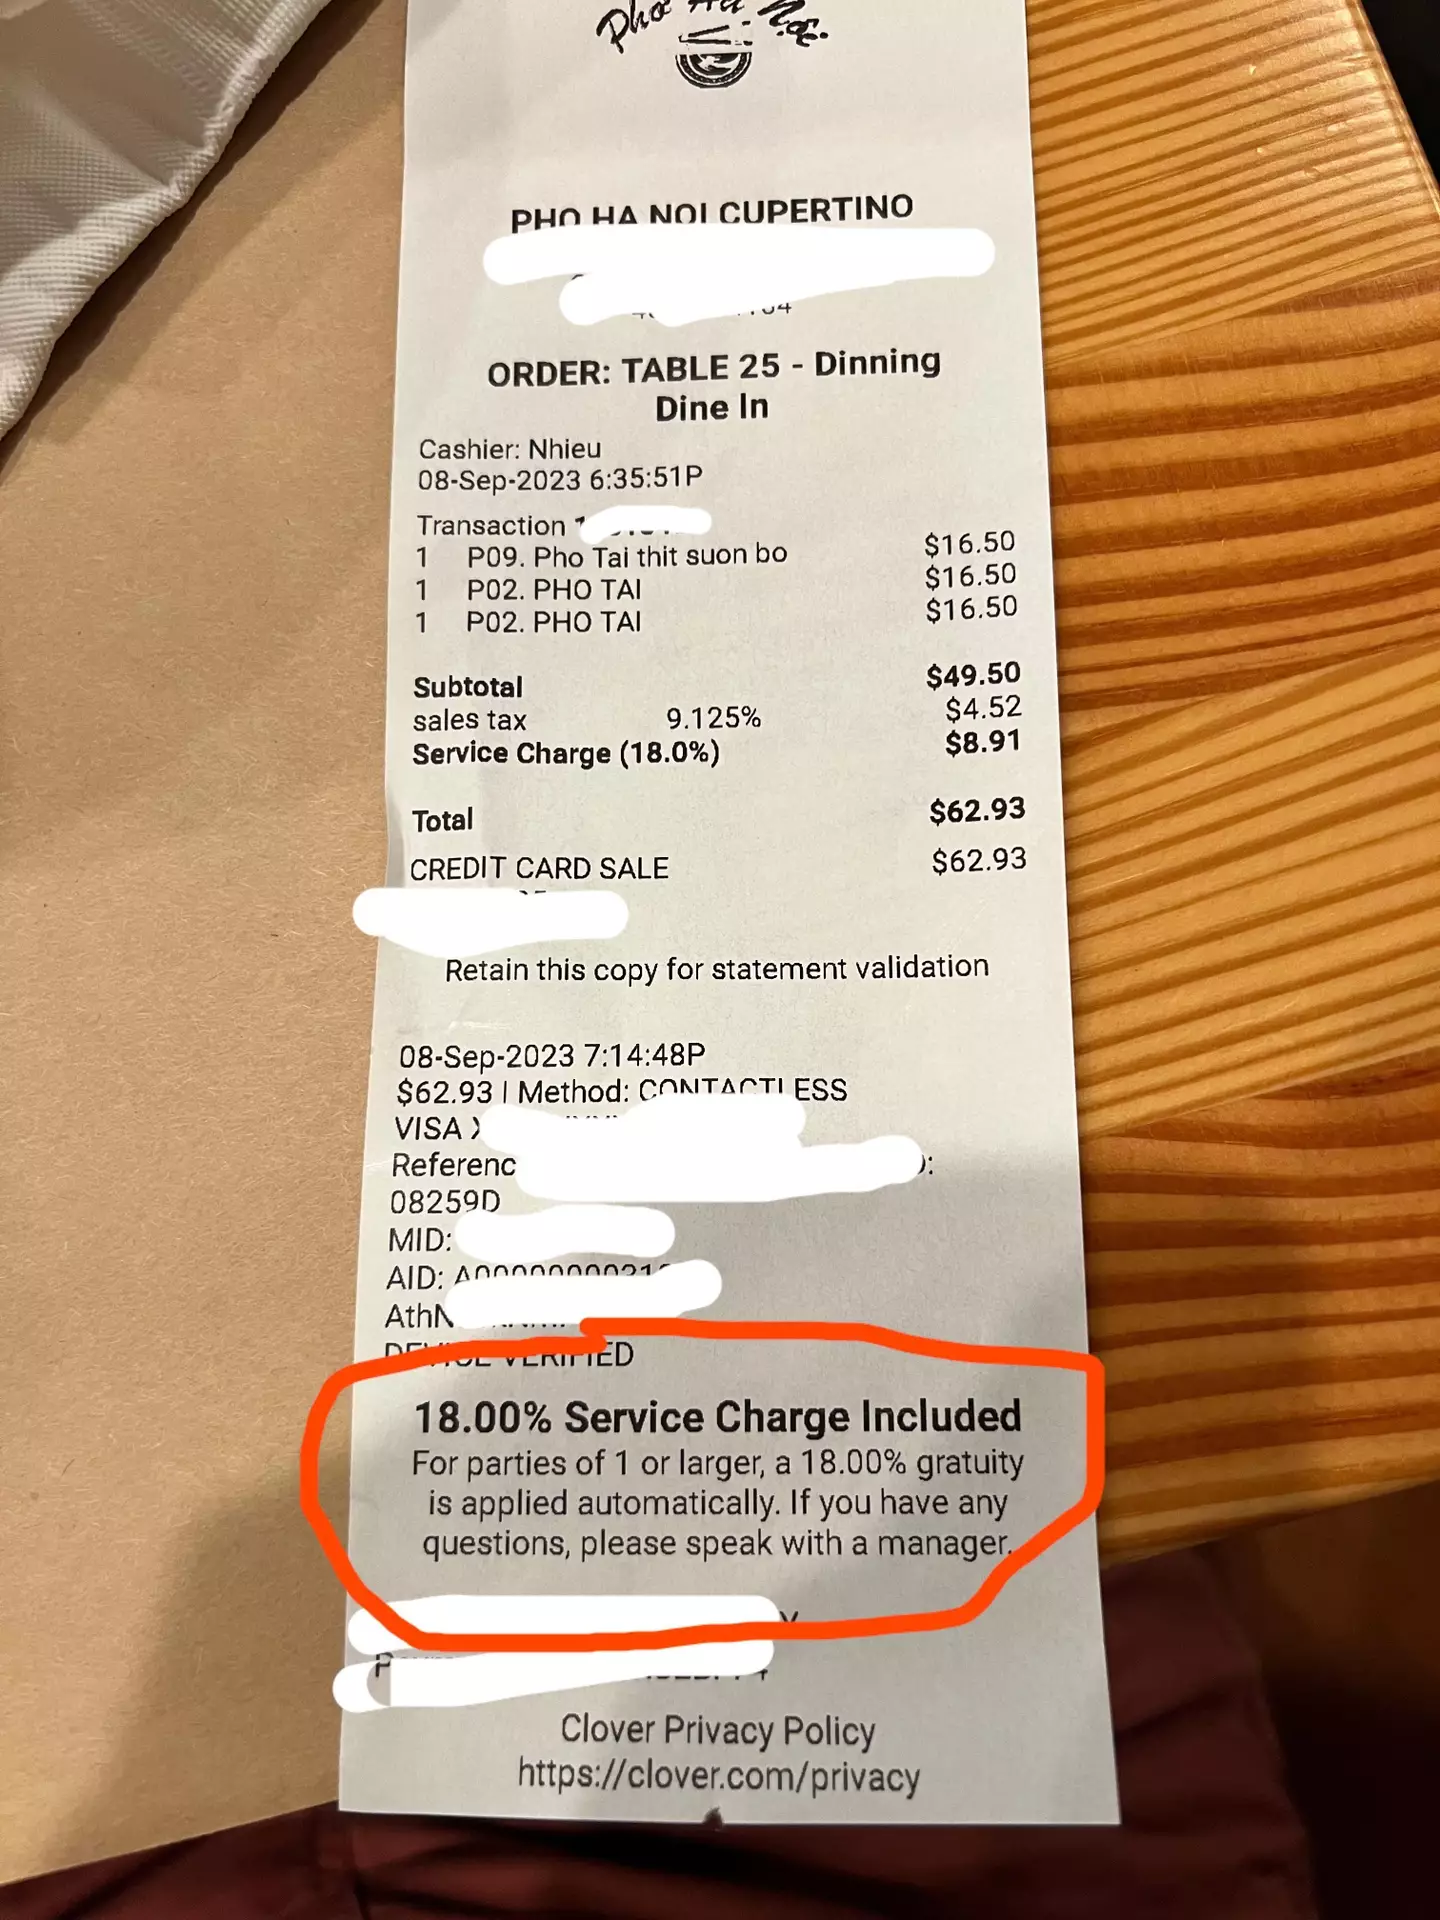 The bill at the restaurant has an 18 percent service charge.